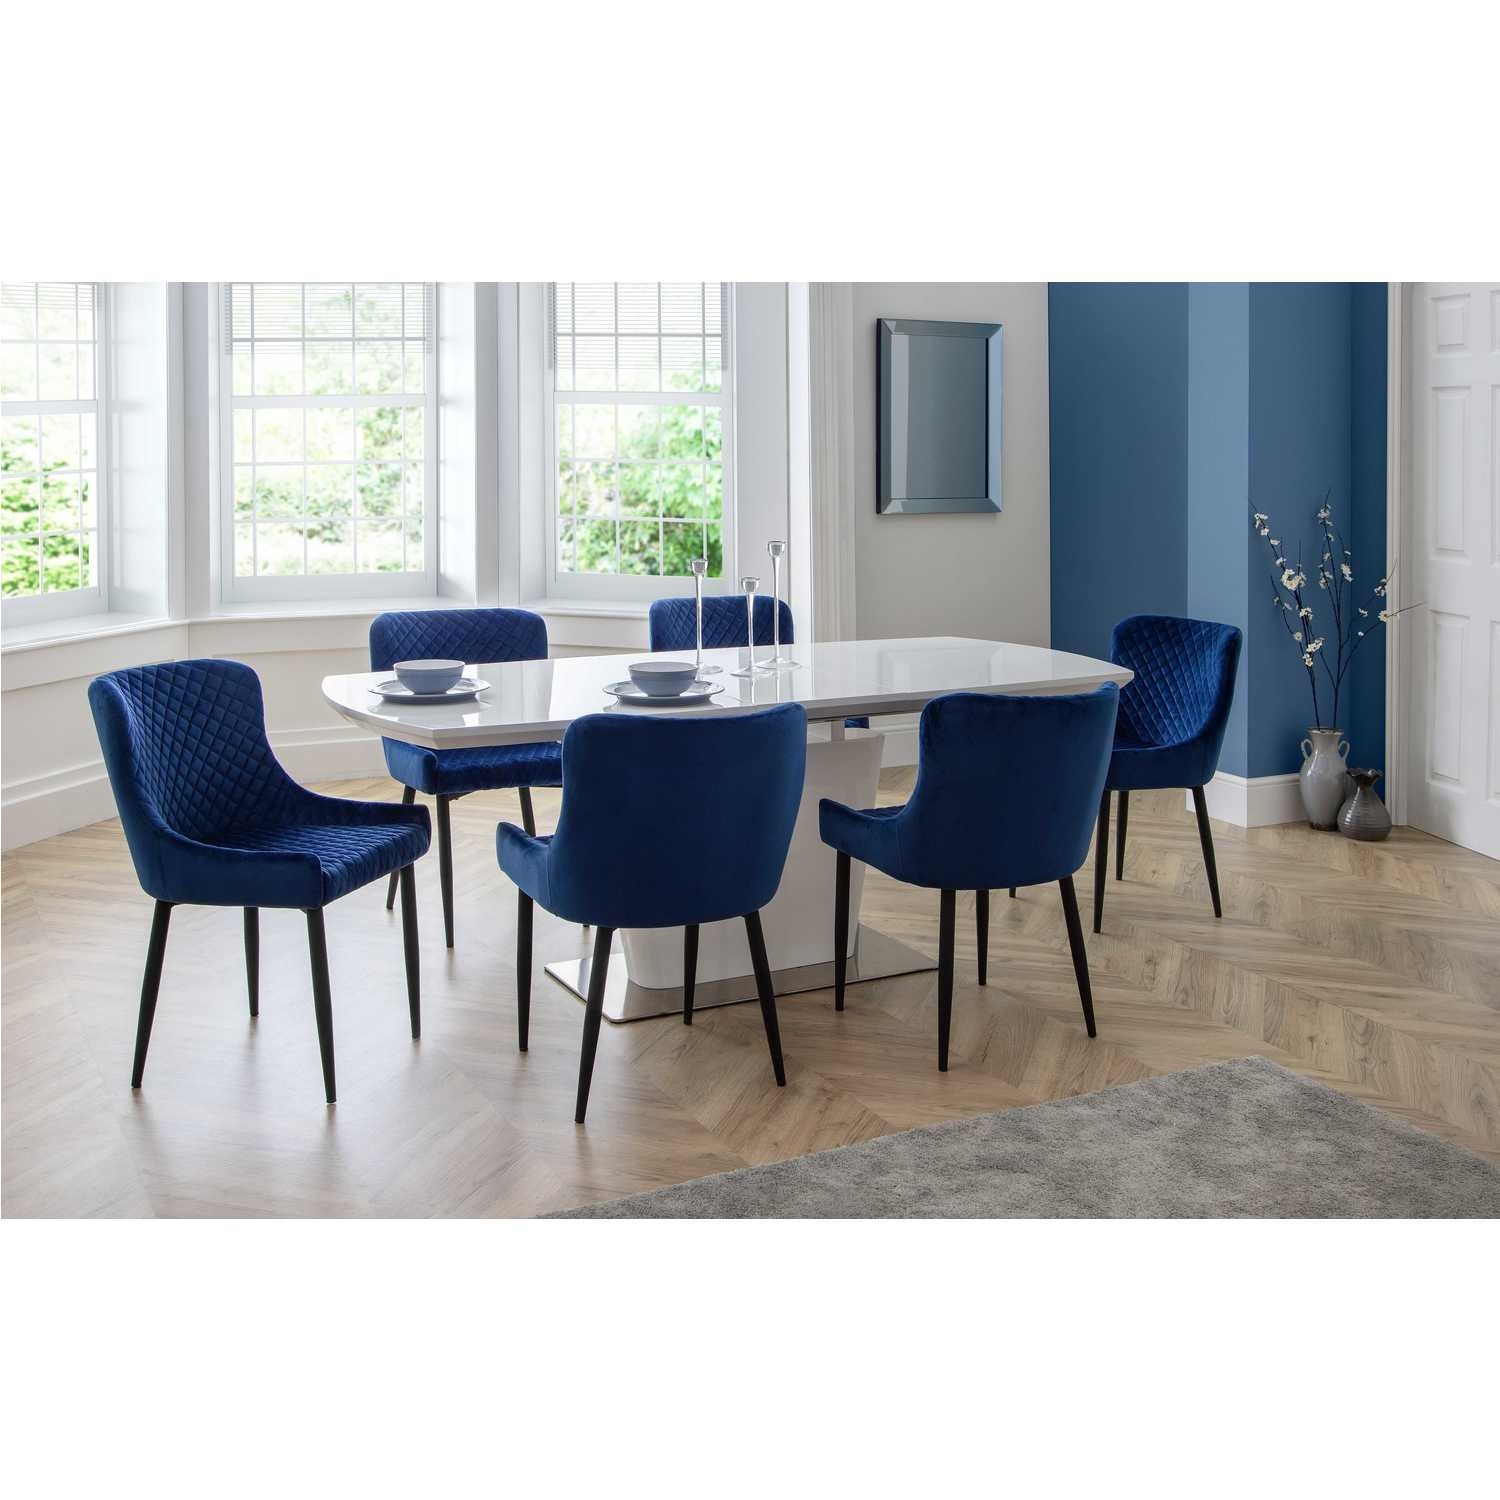 Julian Bowen Como Dining Set With 6, Blue Kitchen Table And Chairs Set